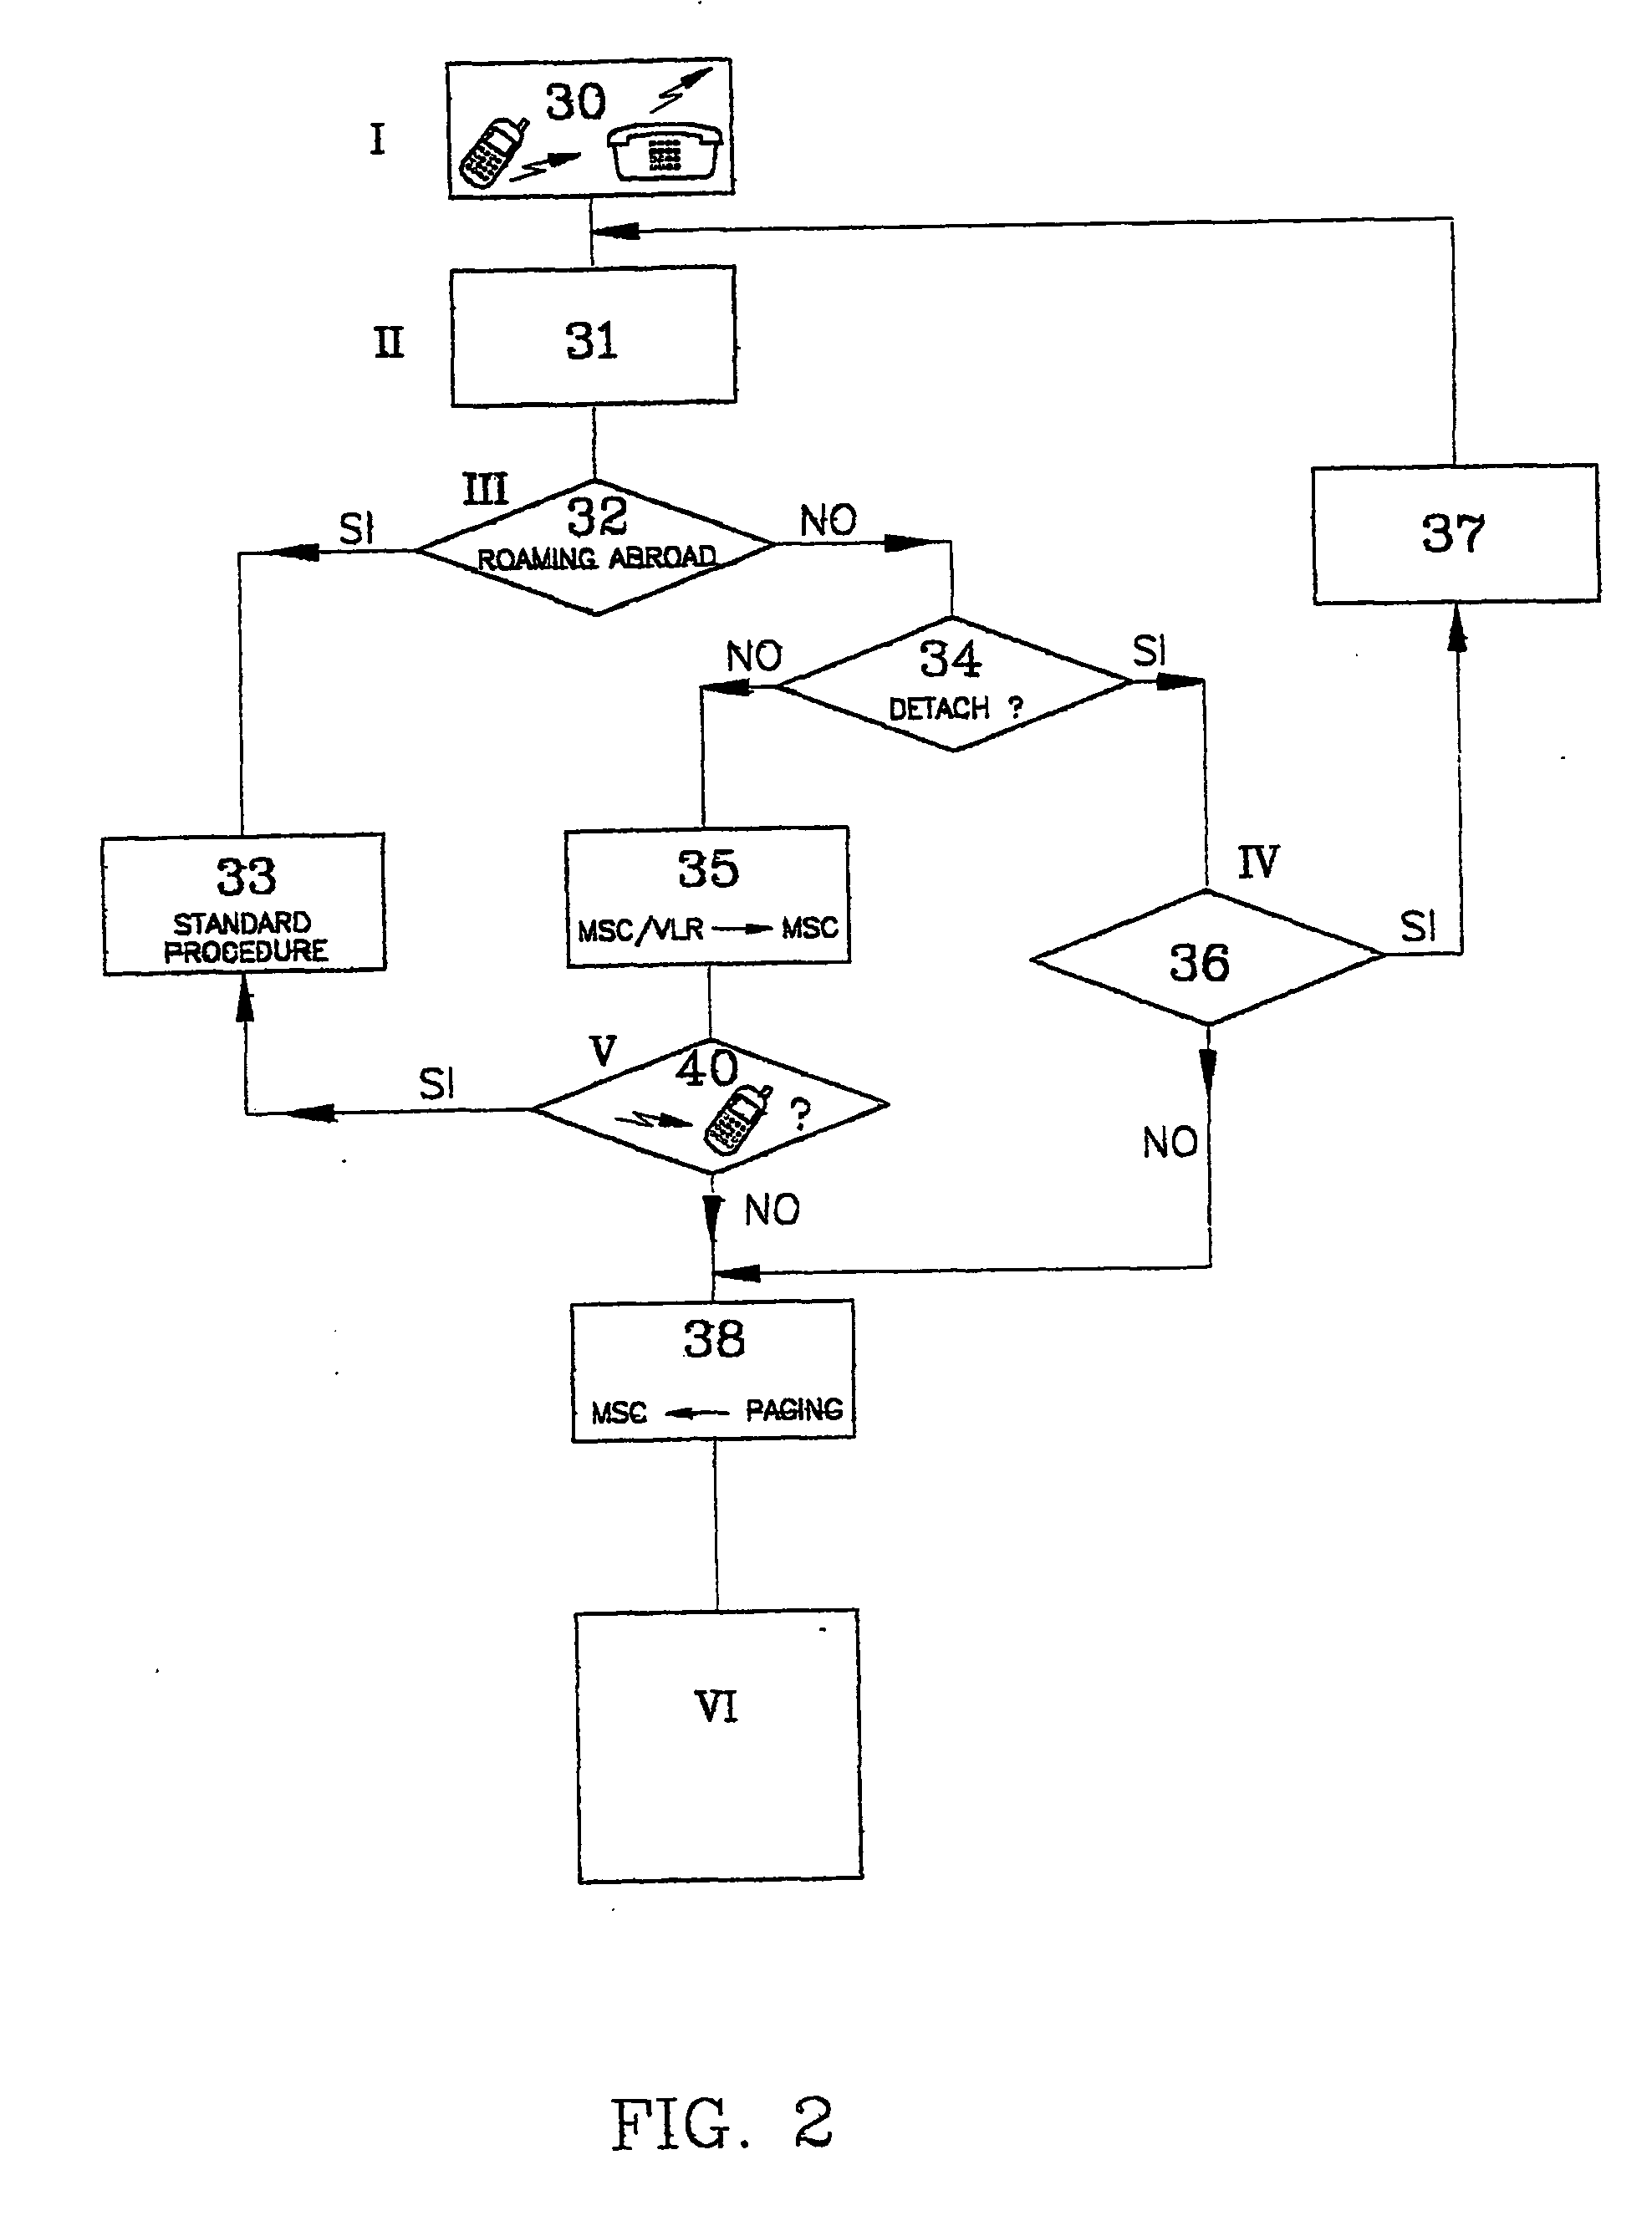 Method and device for handling telephone calls directed to non-reachable mobile phones